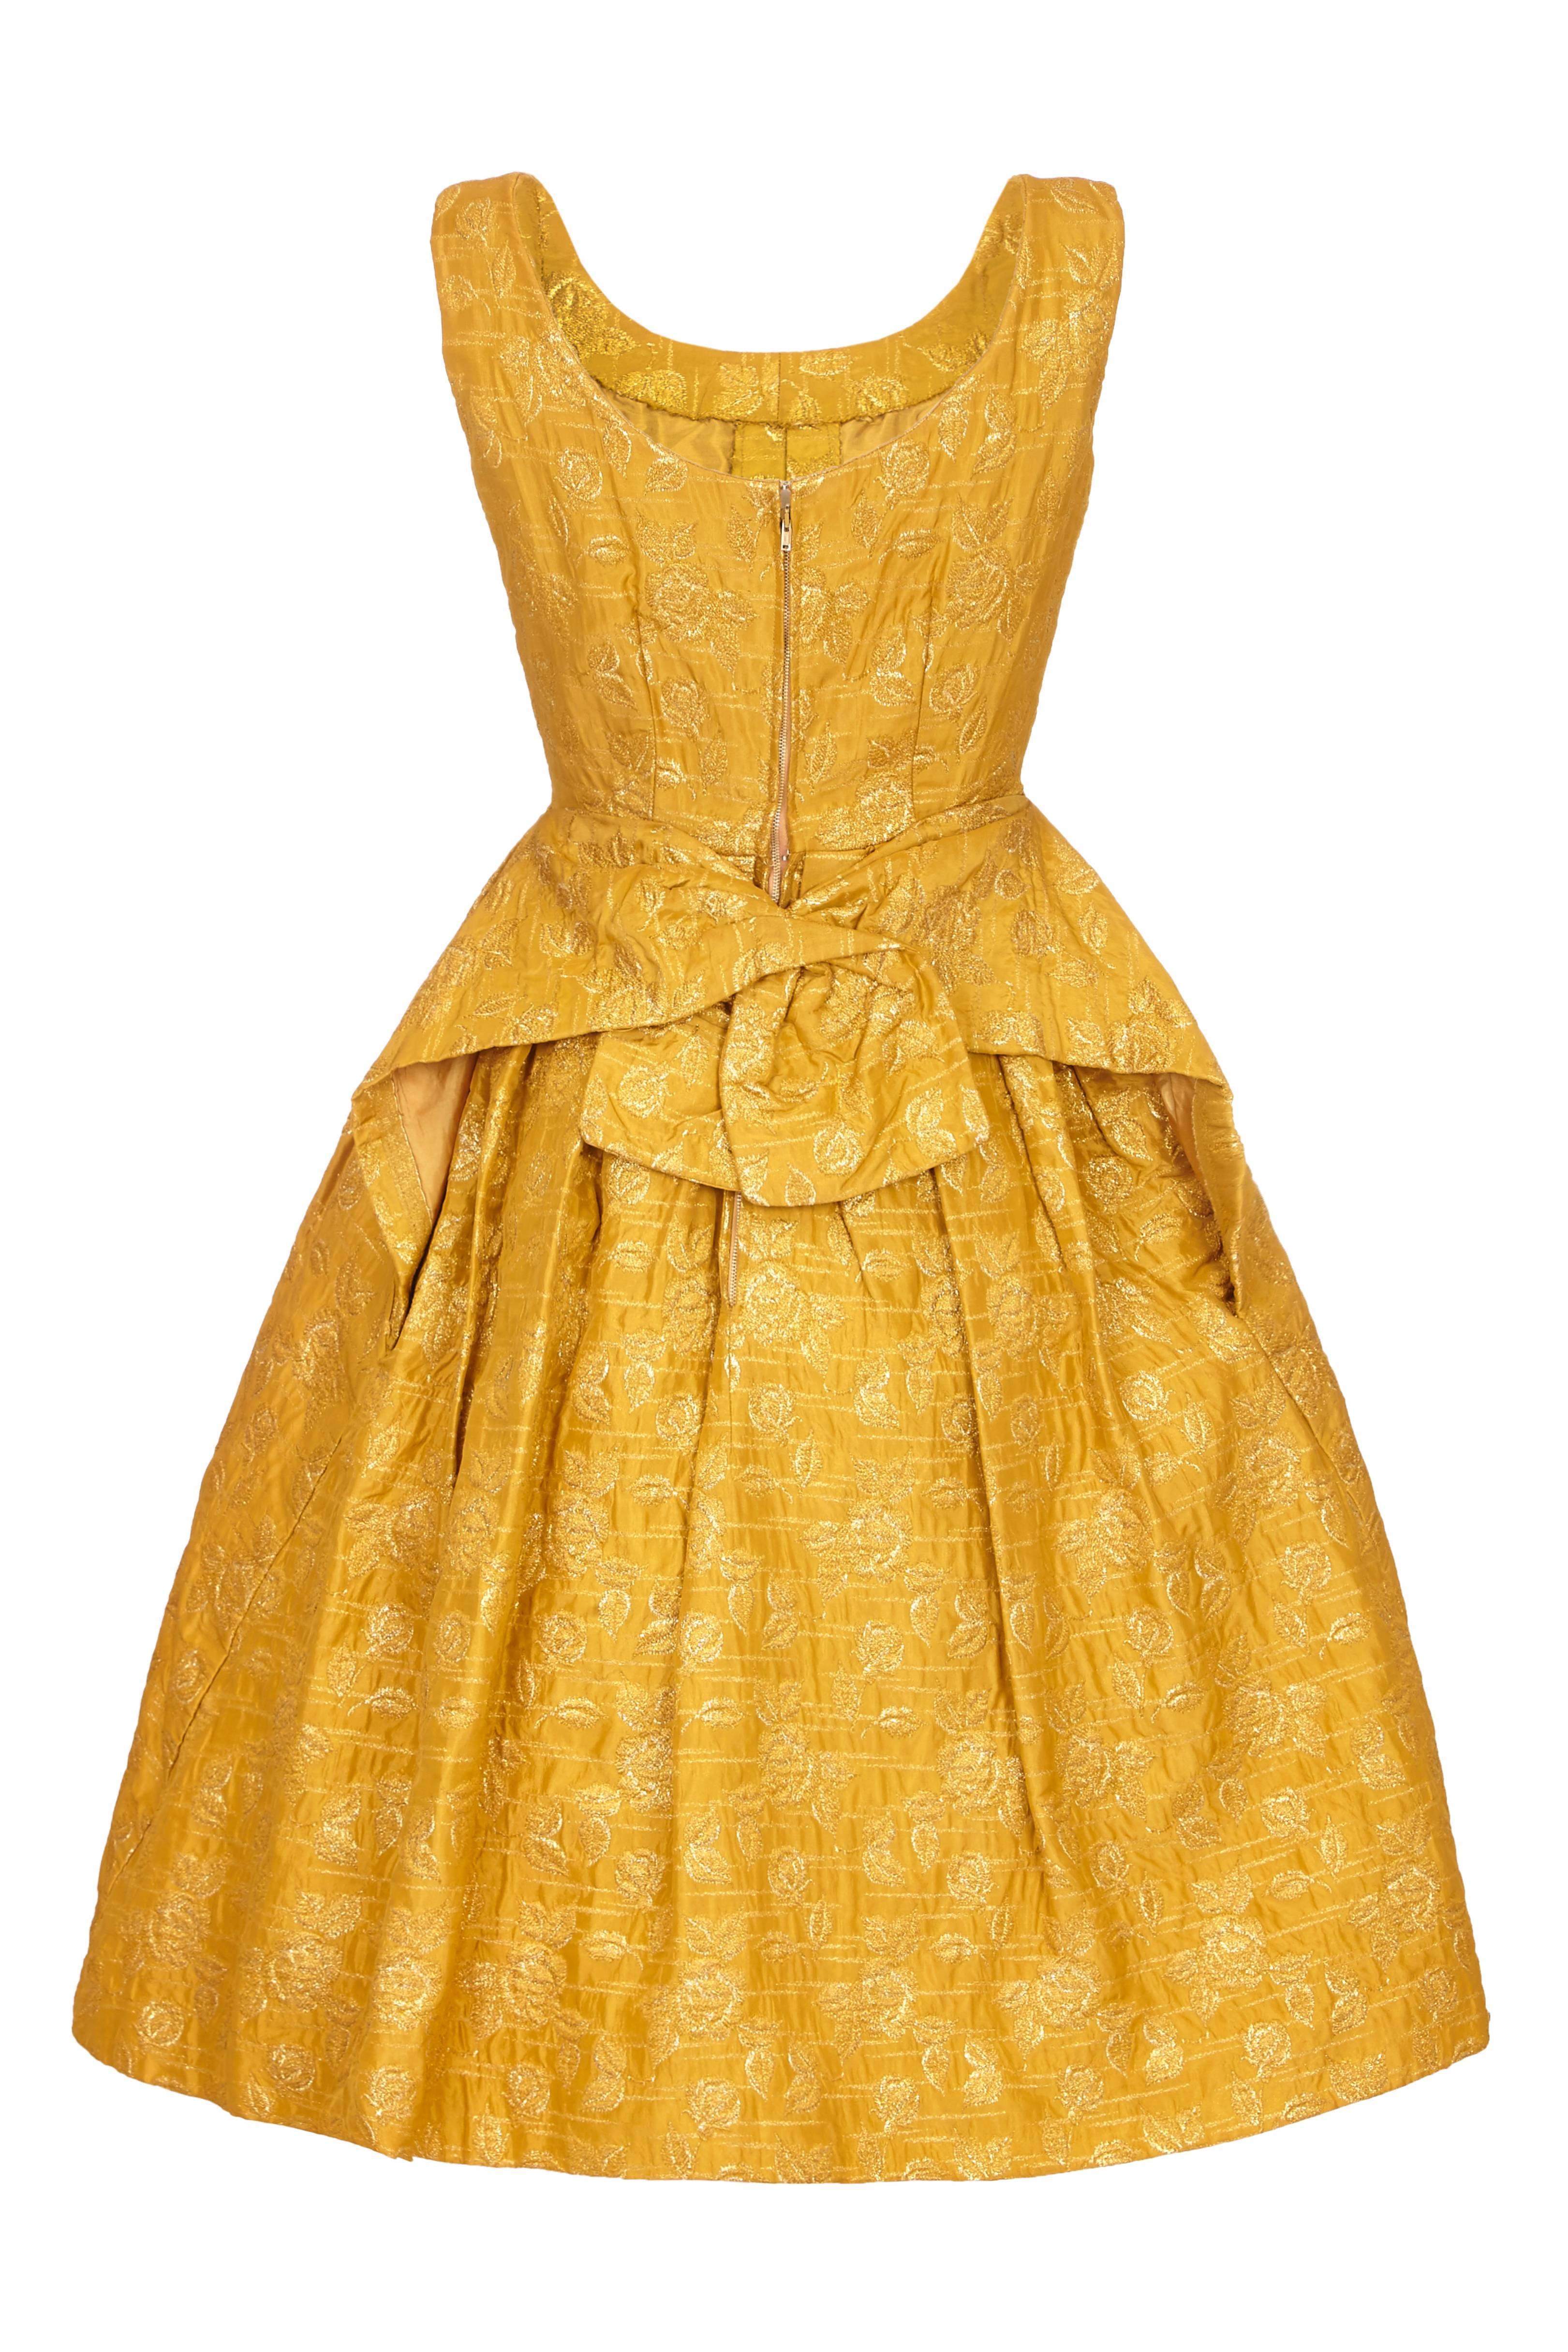 Amazing vintage 1950s gold floral brocade dress from British designer Frank Usher. This sleeveless dress has a hooped canvas petticoat attached inside which keeps the fullness in the skirt and also extends up with boning to the waist.  It fastens at